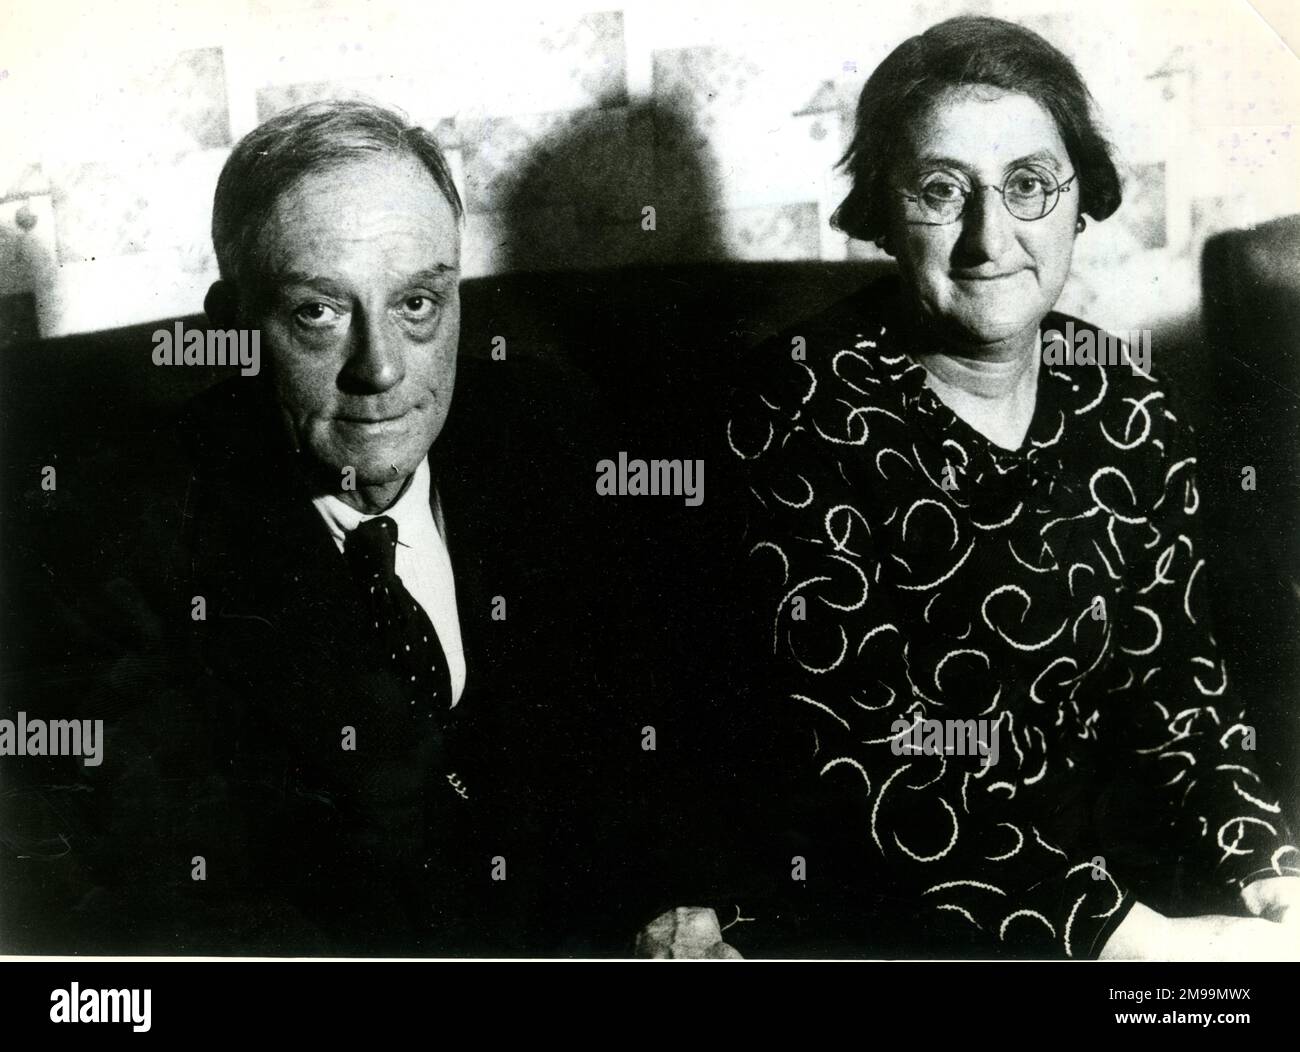 Mrs Agnes Oxley (with her husband Mr Oxley), a key witness in the Buck Ruxton murder case, as she worked as a charlady at the house where the murders took place. Buck Ruxton (Bukhtyar Chompa Rustomji Ratanji Hakim, 1899-1936), an Indian-born British physician, was convicted and hanged for the murders in September 1935 of his common-law wife, Isabella Ruxton (nee Kerr), and their housemaid, Mary Jane Rogerson, at their home in Lancaster. The murders are also known as the Bodies under the Bridge and the Jigsaw Murders. Stock Photo